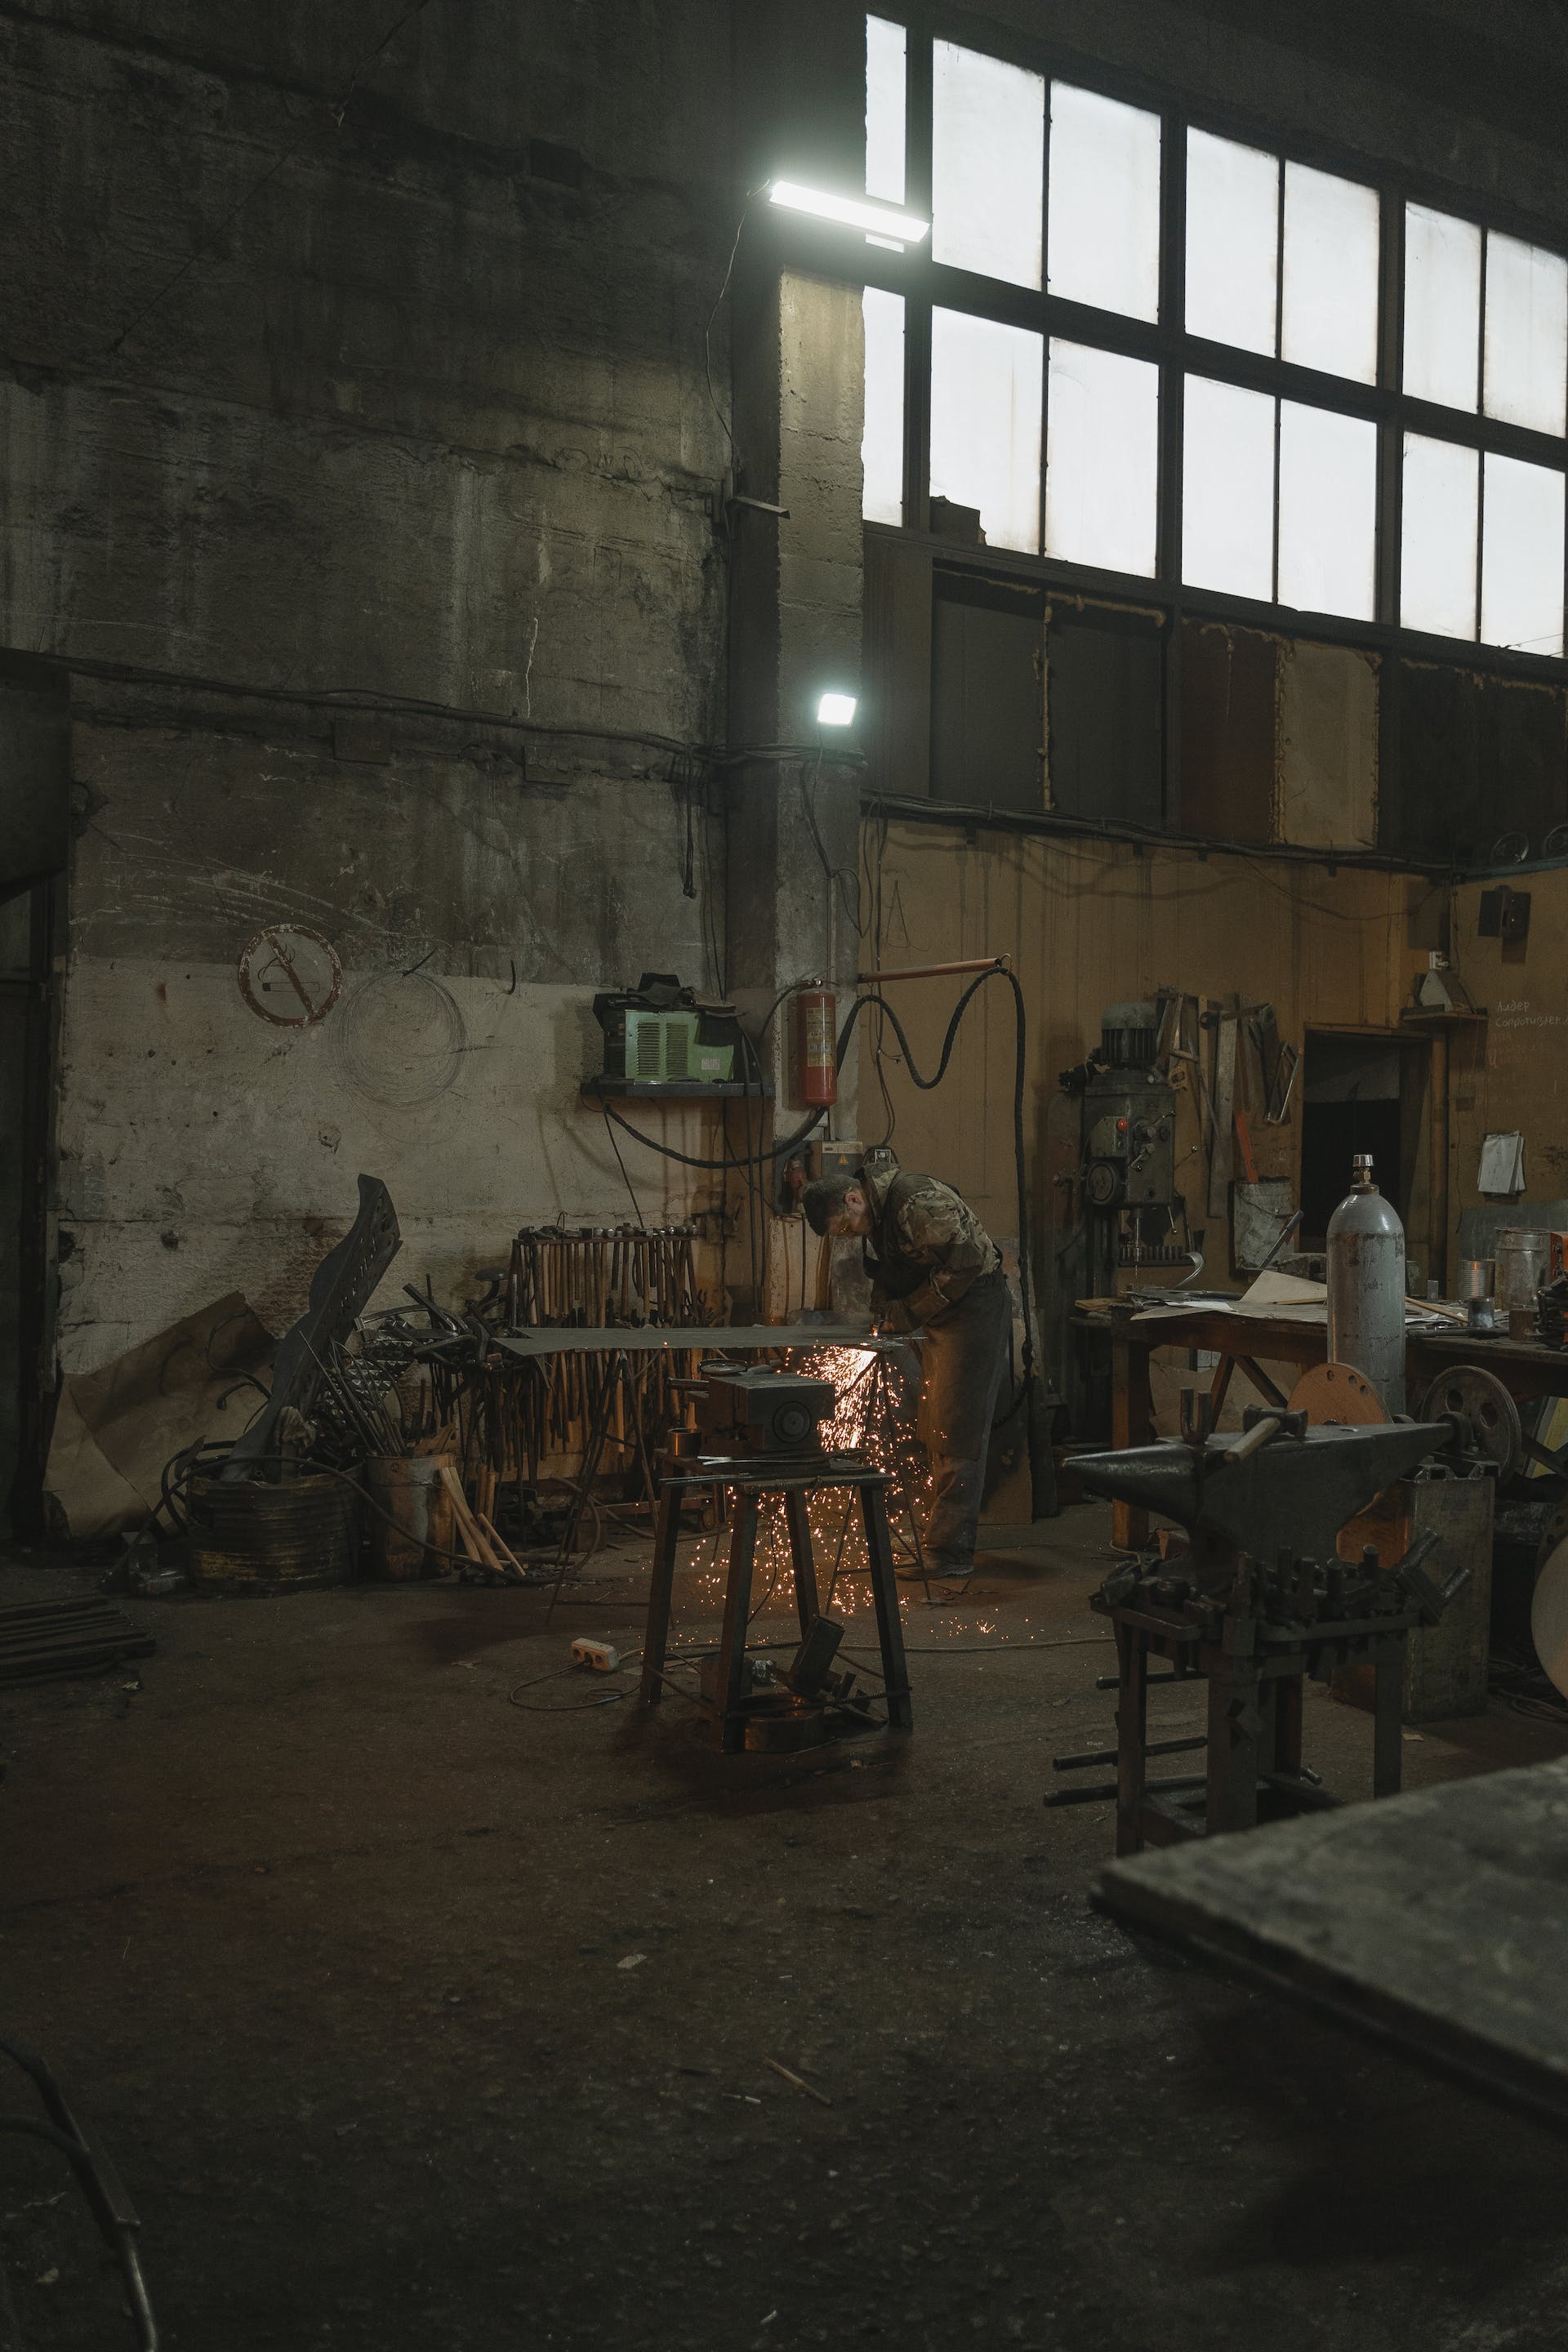 A person welding metal in a workshop | Source: Pexels